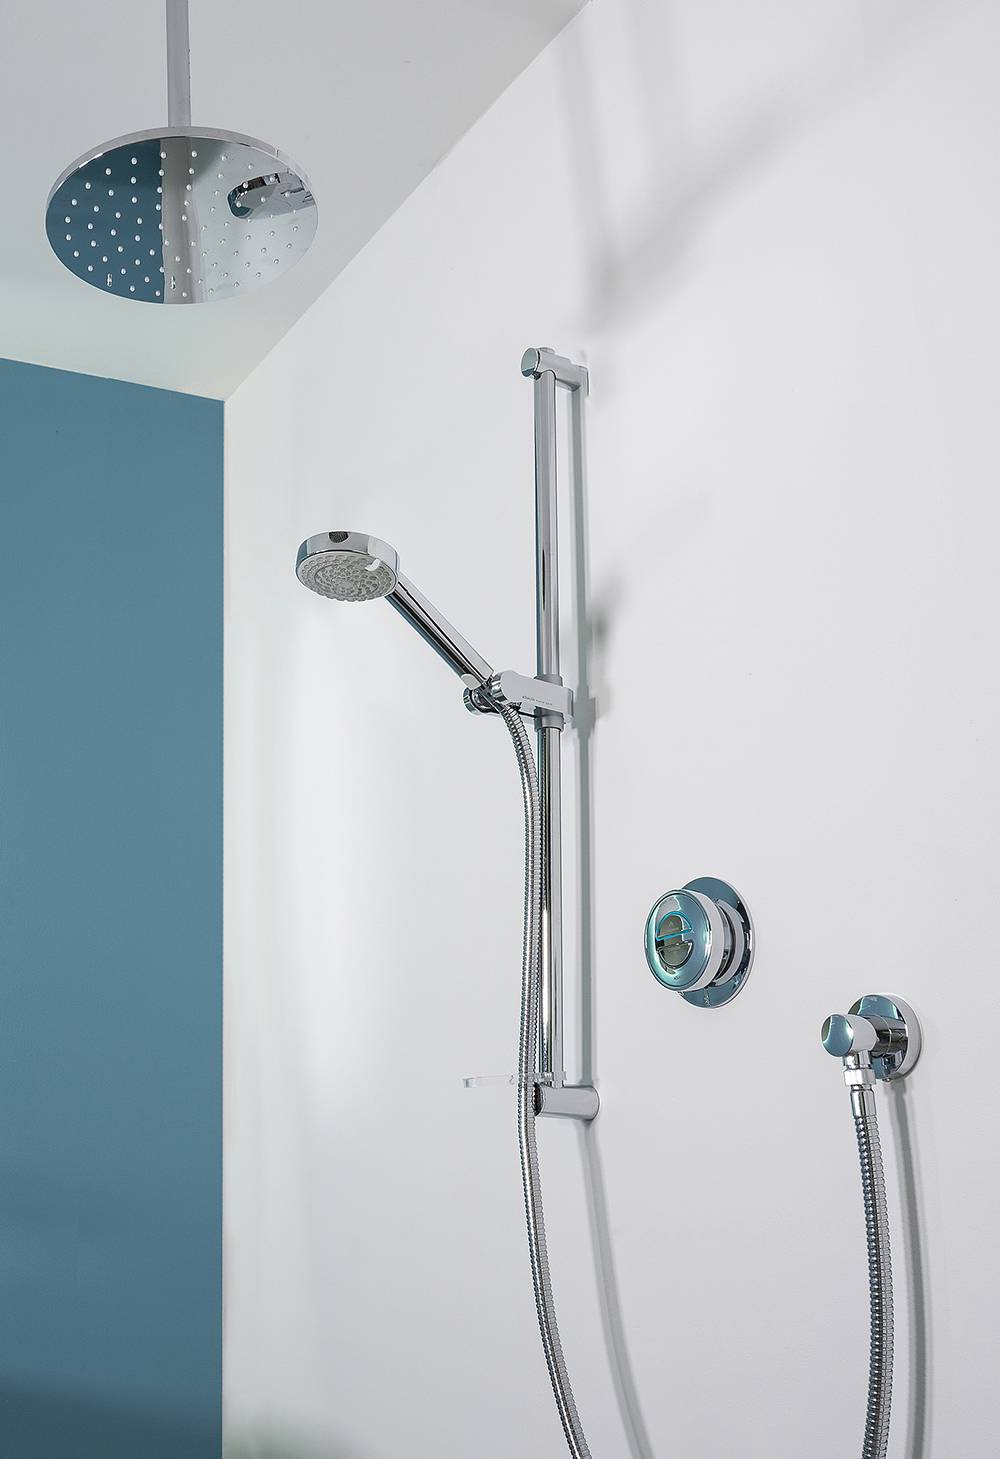 Quartz - Digital Divert Concealed With Adjustable Head And Ceiling Fixed Drencher